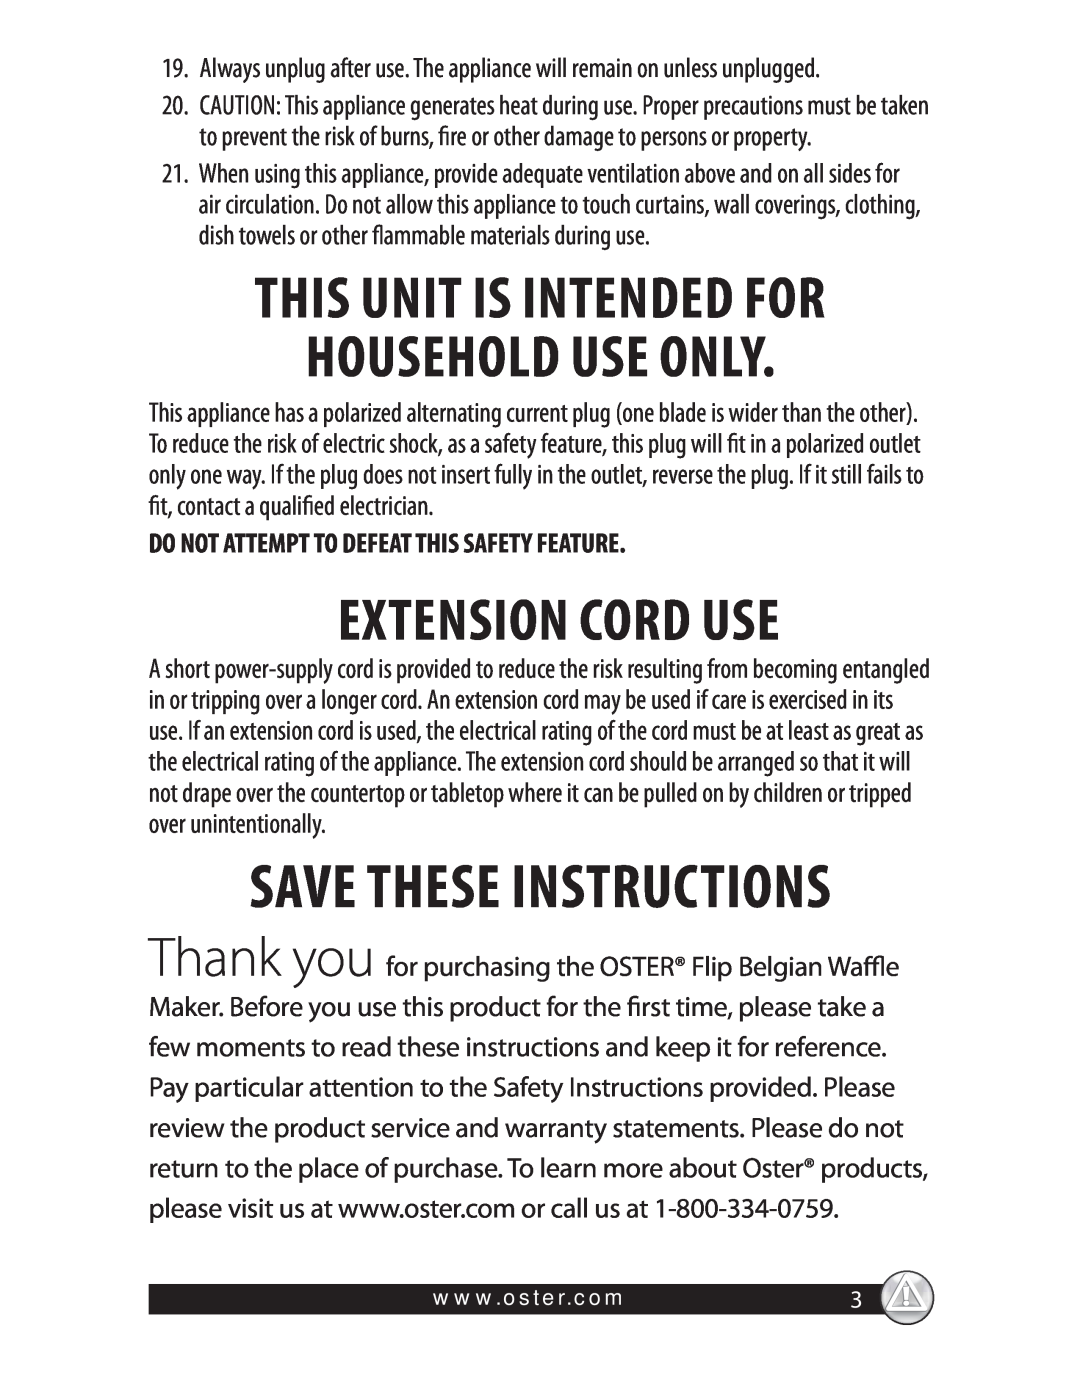 Oster CKSTWFBF20 warranty Household Use Only, Extension Cord Use, Do Not Attempt To Defeat This Safety Feature 